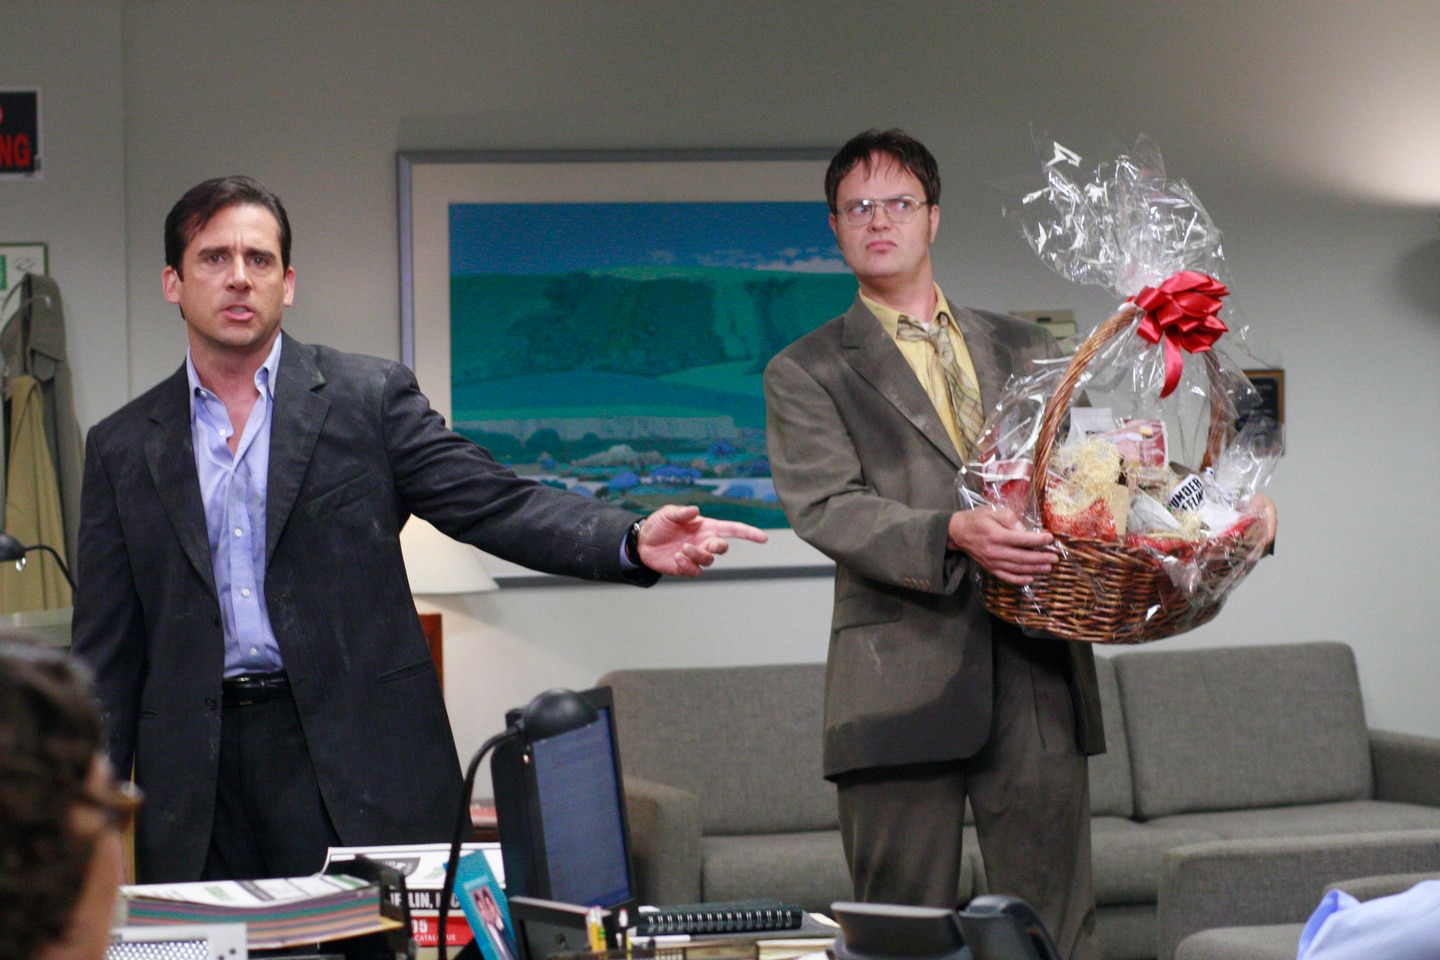 YARN, The Office, Dunder Mifflin Infinity top video clips, TV Episode